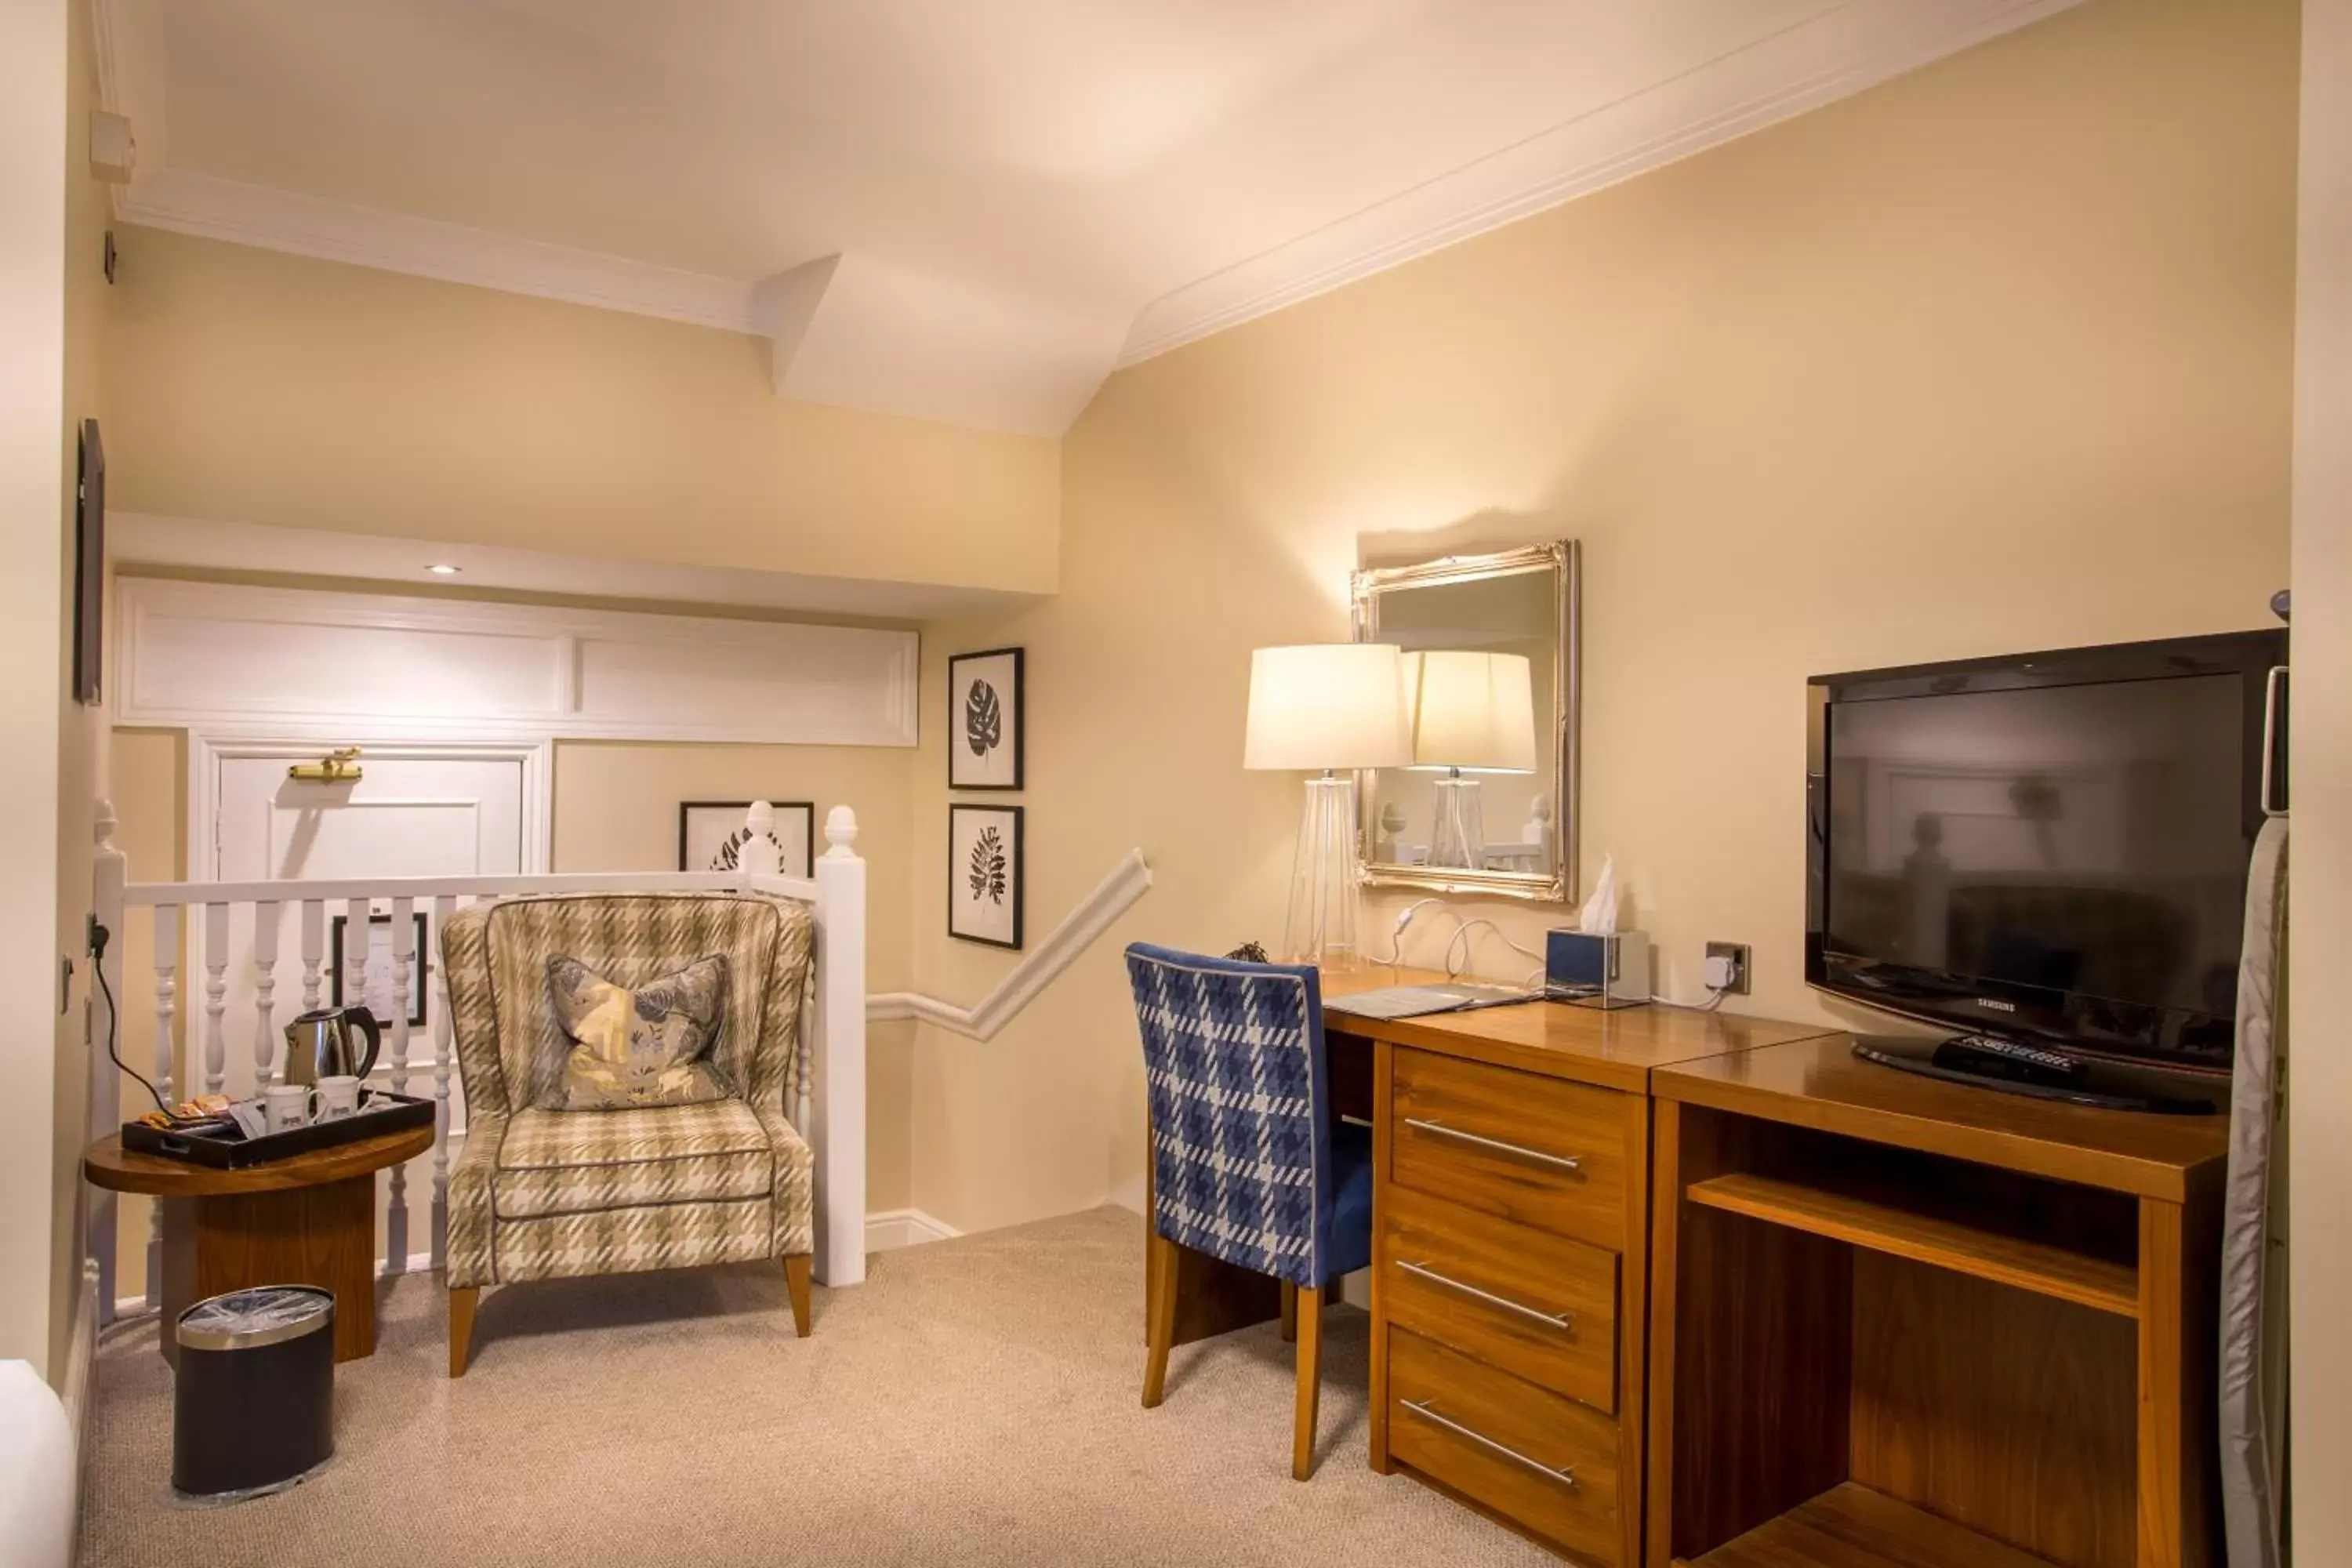 Bedroom, TV/Entertainment Center in The Talbot Hotel, Oundle , Near Peterborough